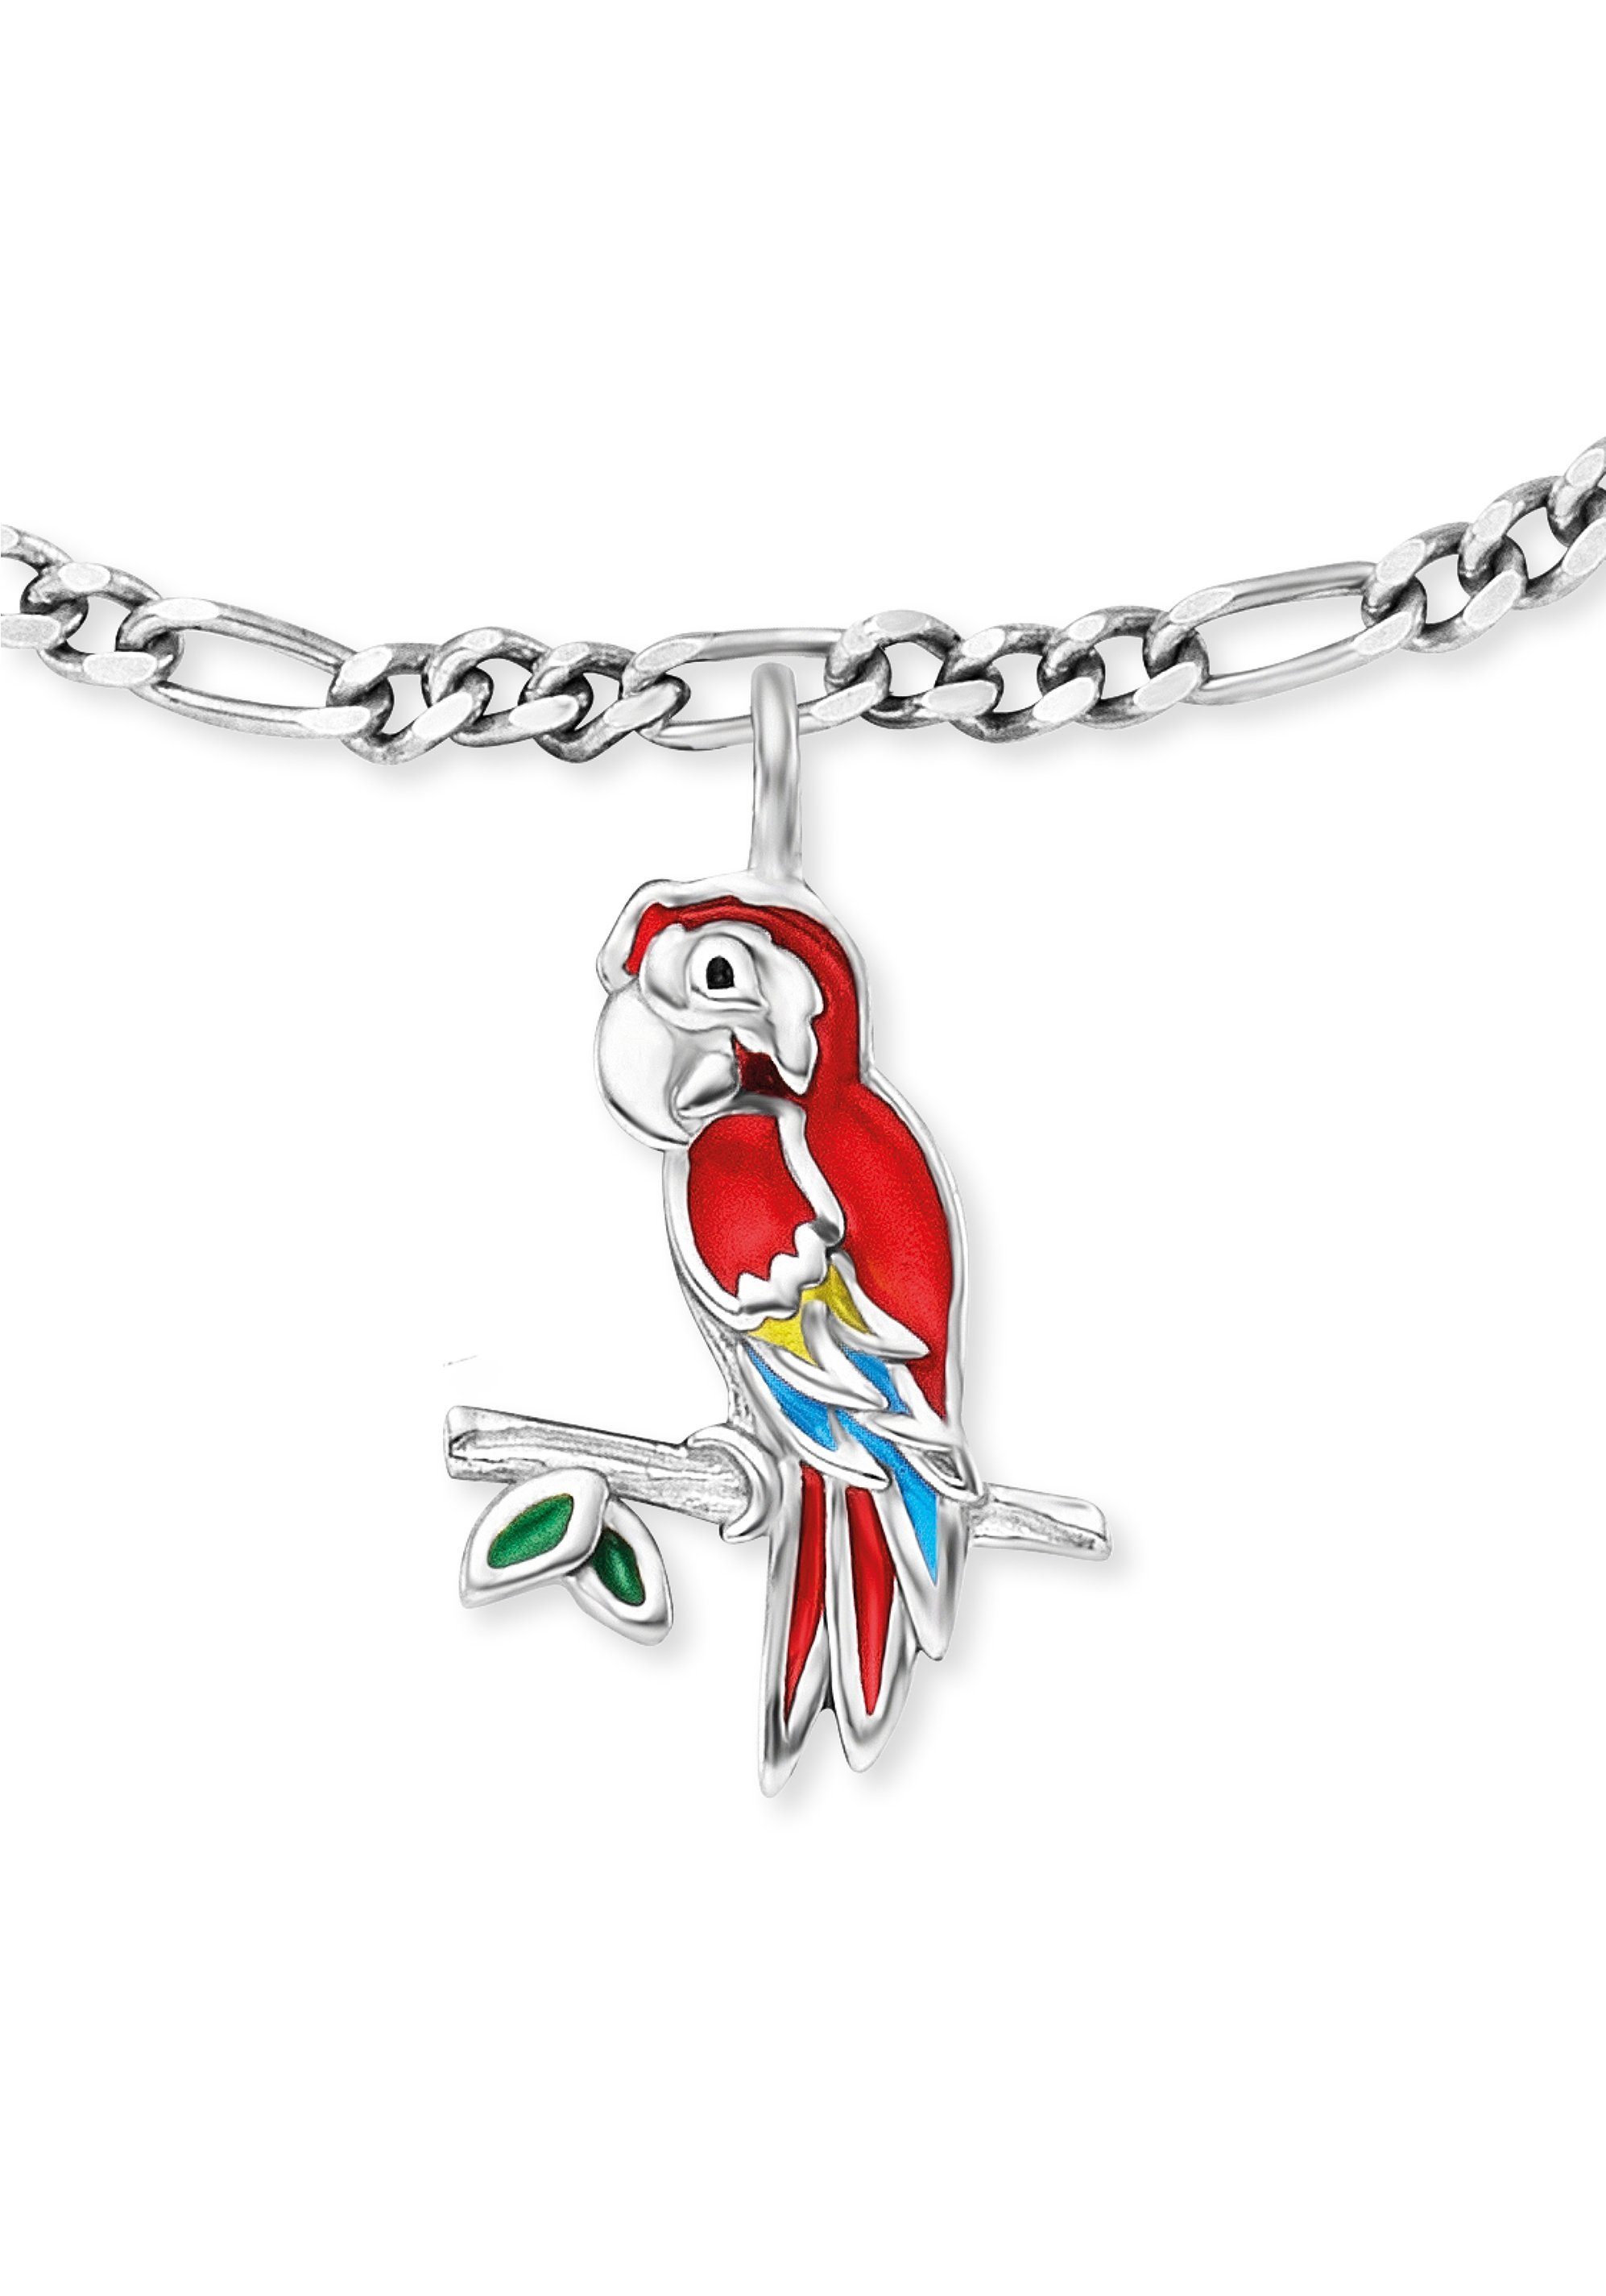 Herzengel HEB-PARROT, Emaille Papagei, mit Armband